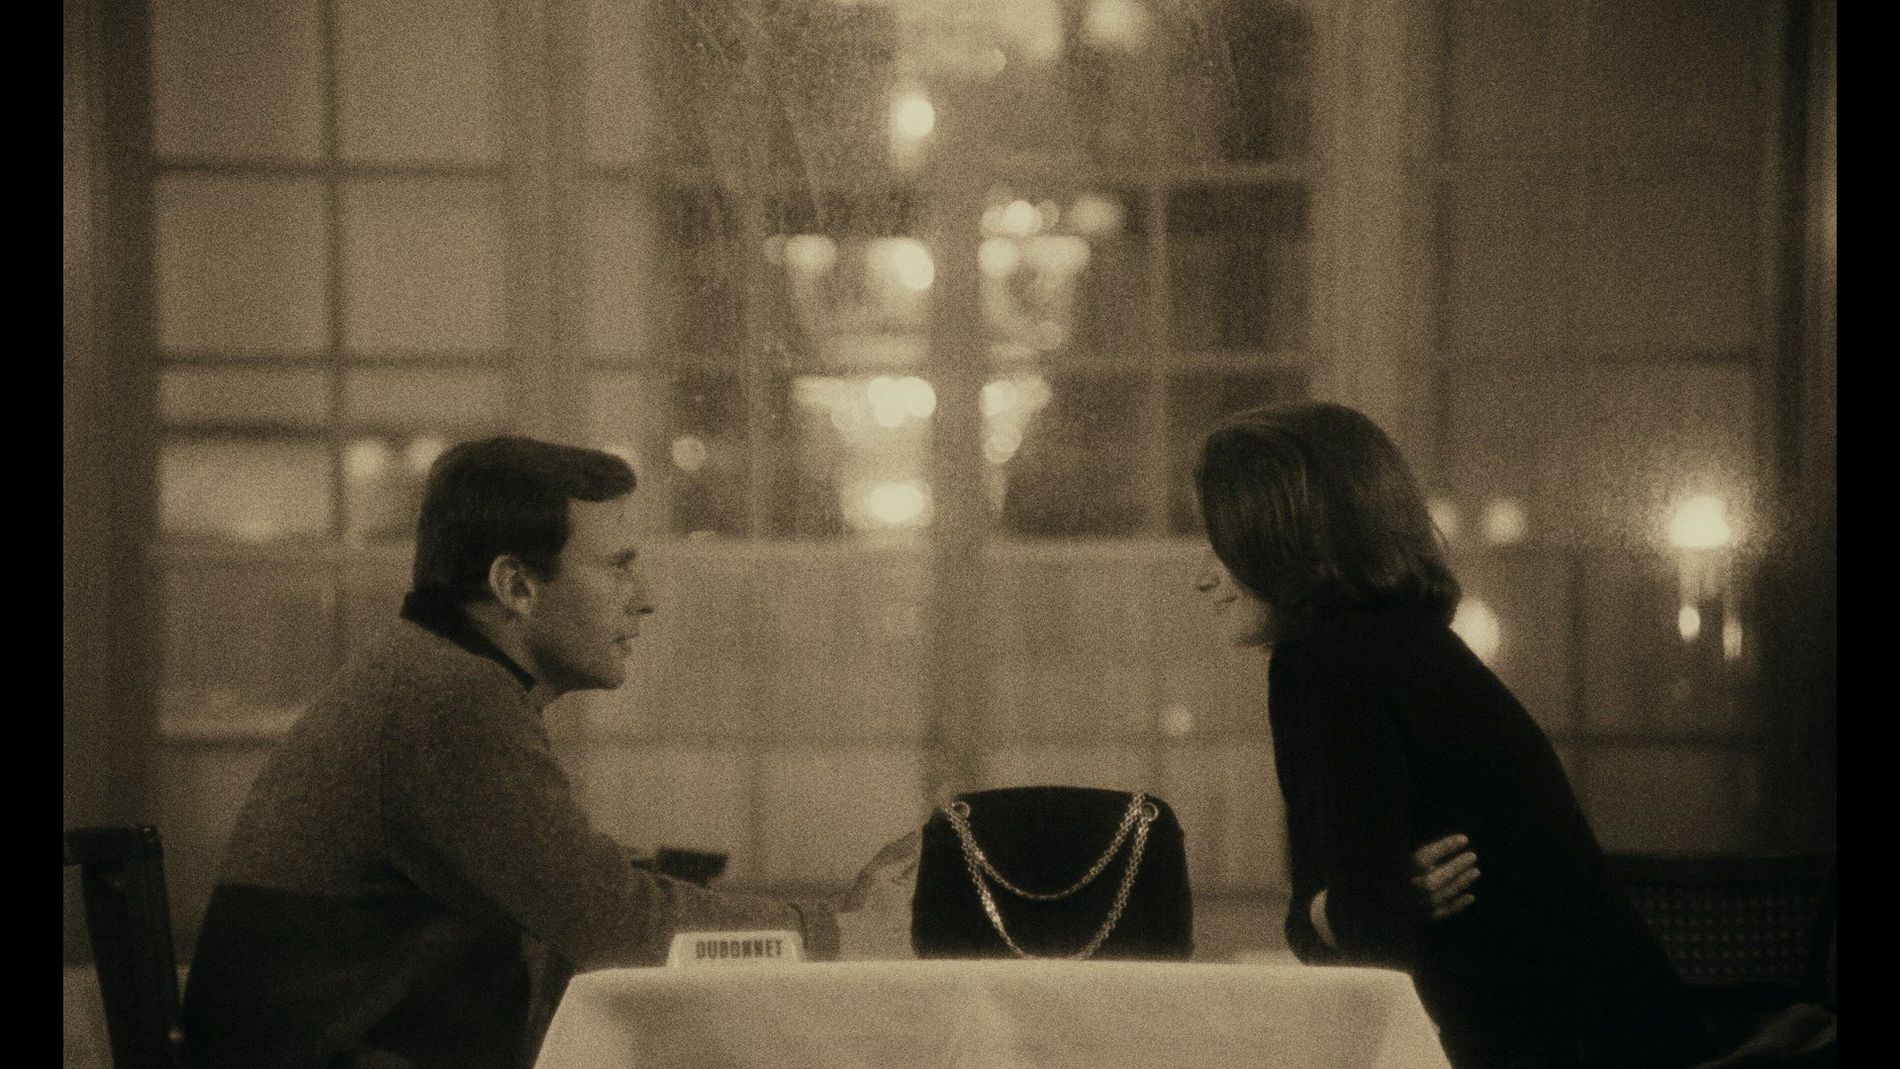 A still image from A Man and a Woman by Claude Lelouch